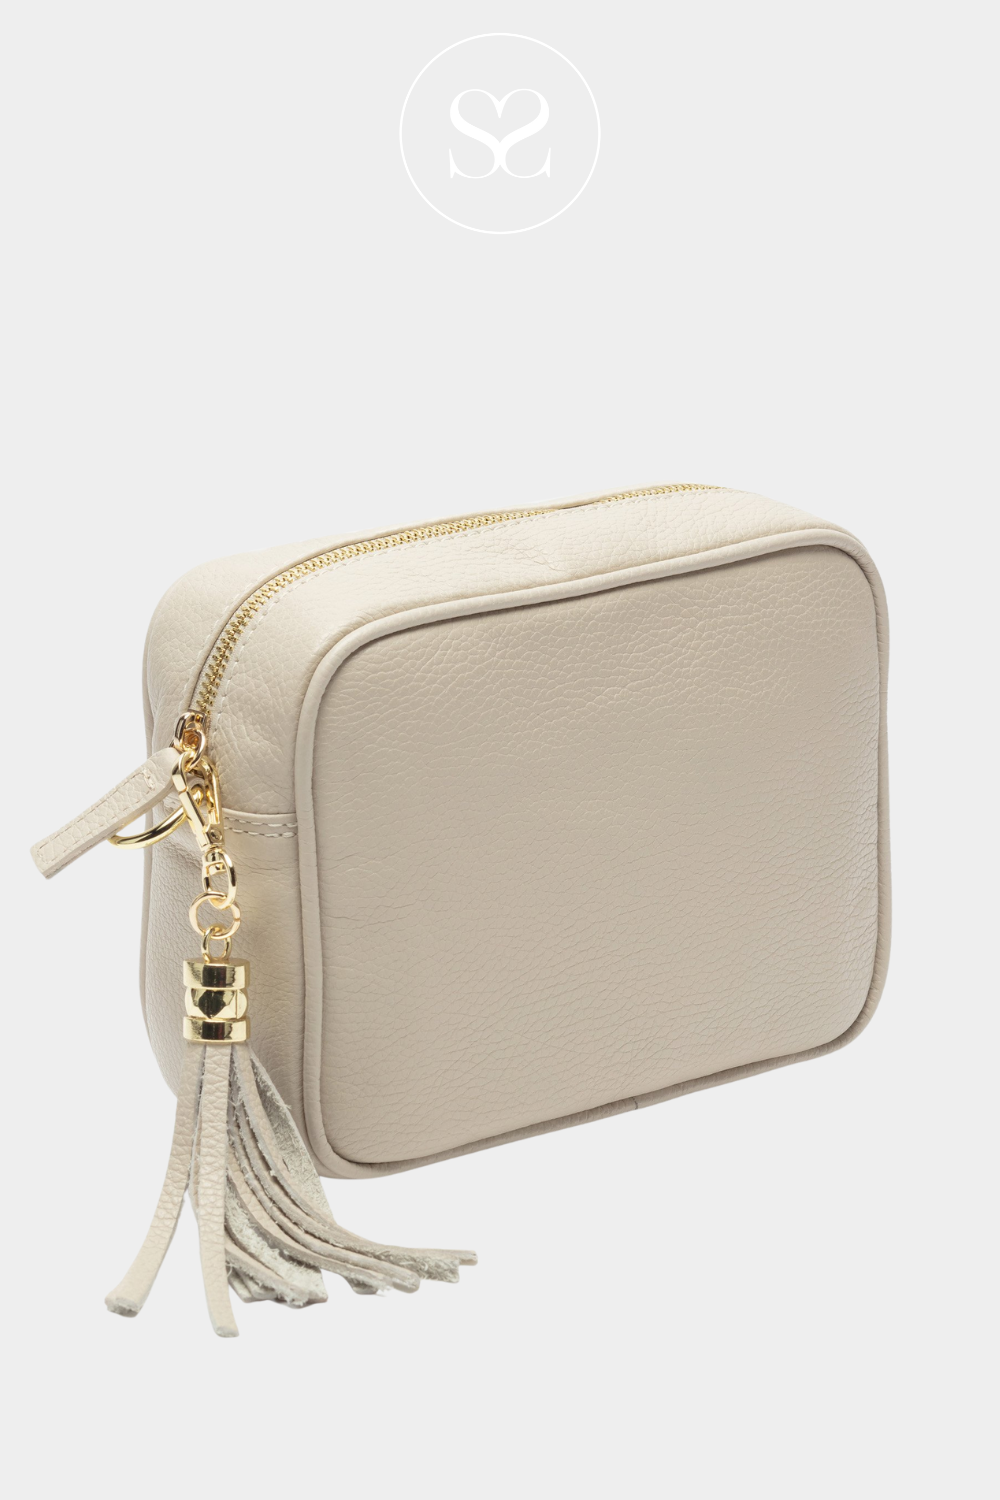 ELIE BEAUMONT CREAM LEATHER CROSSBODY BAGS WITH GOLD HARDWARE